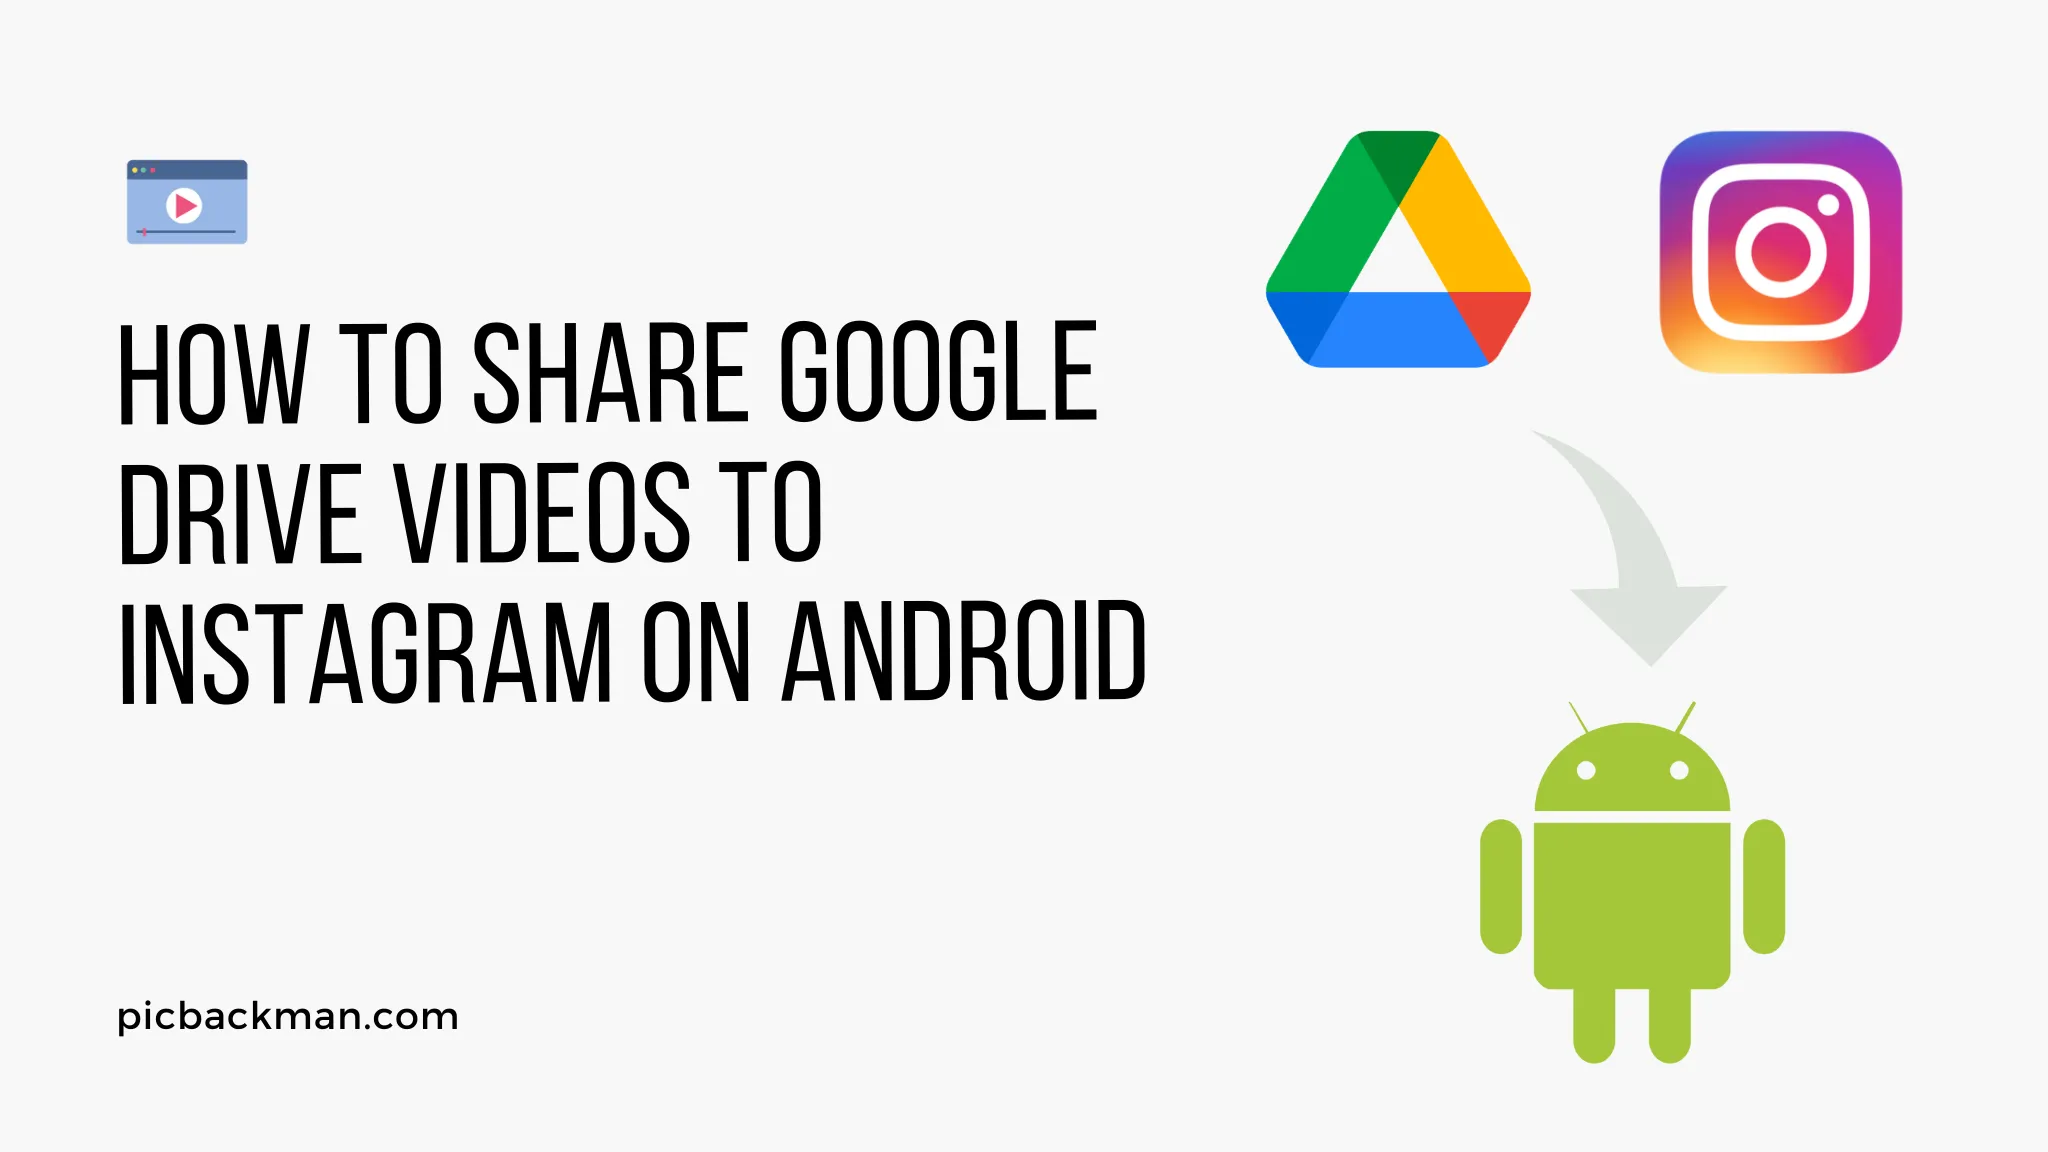 How to Share Google Drive Videos to Instagram on Android?